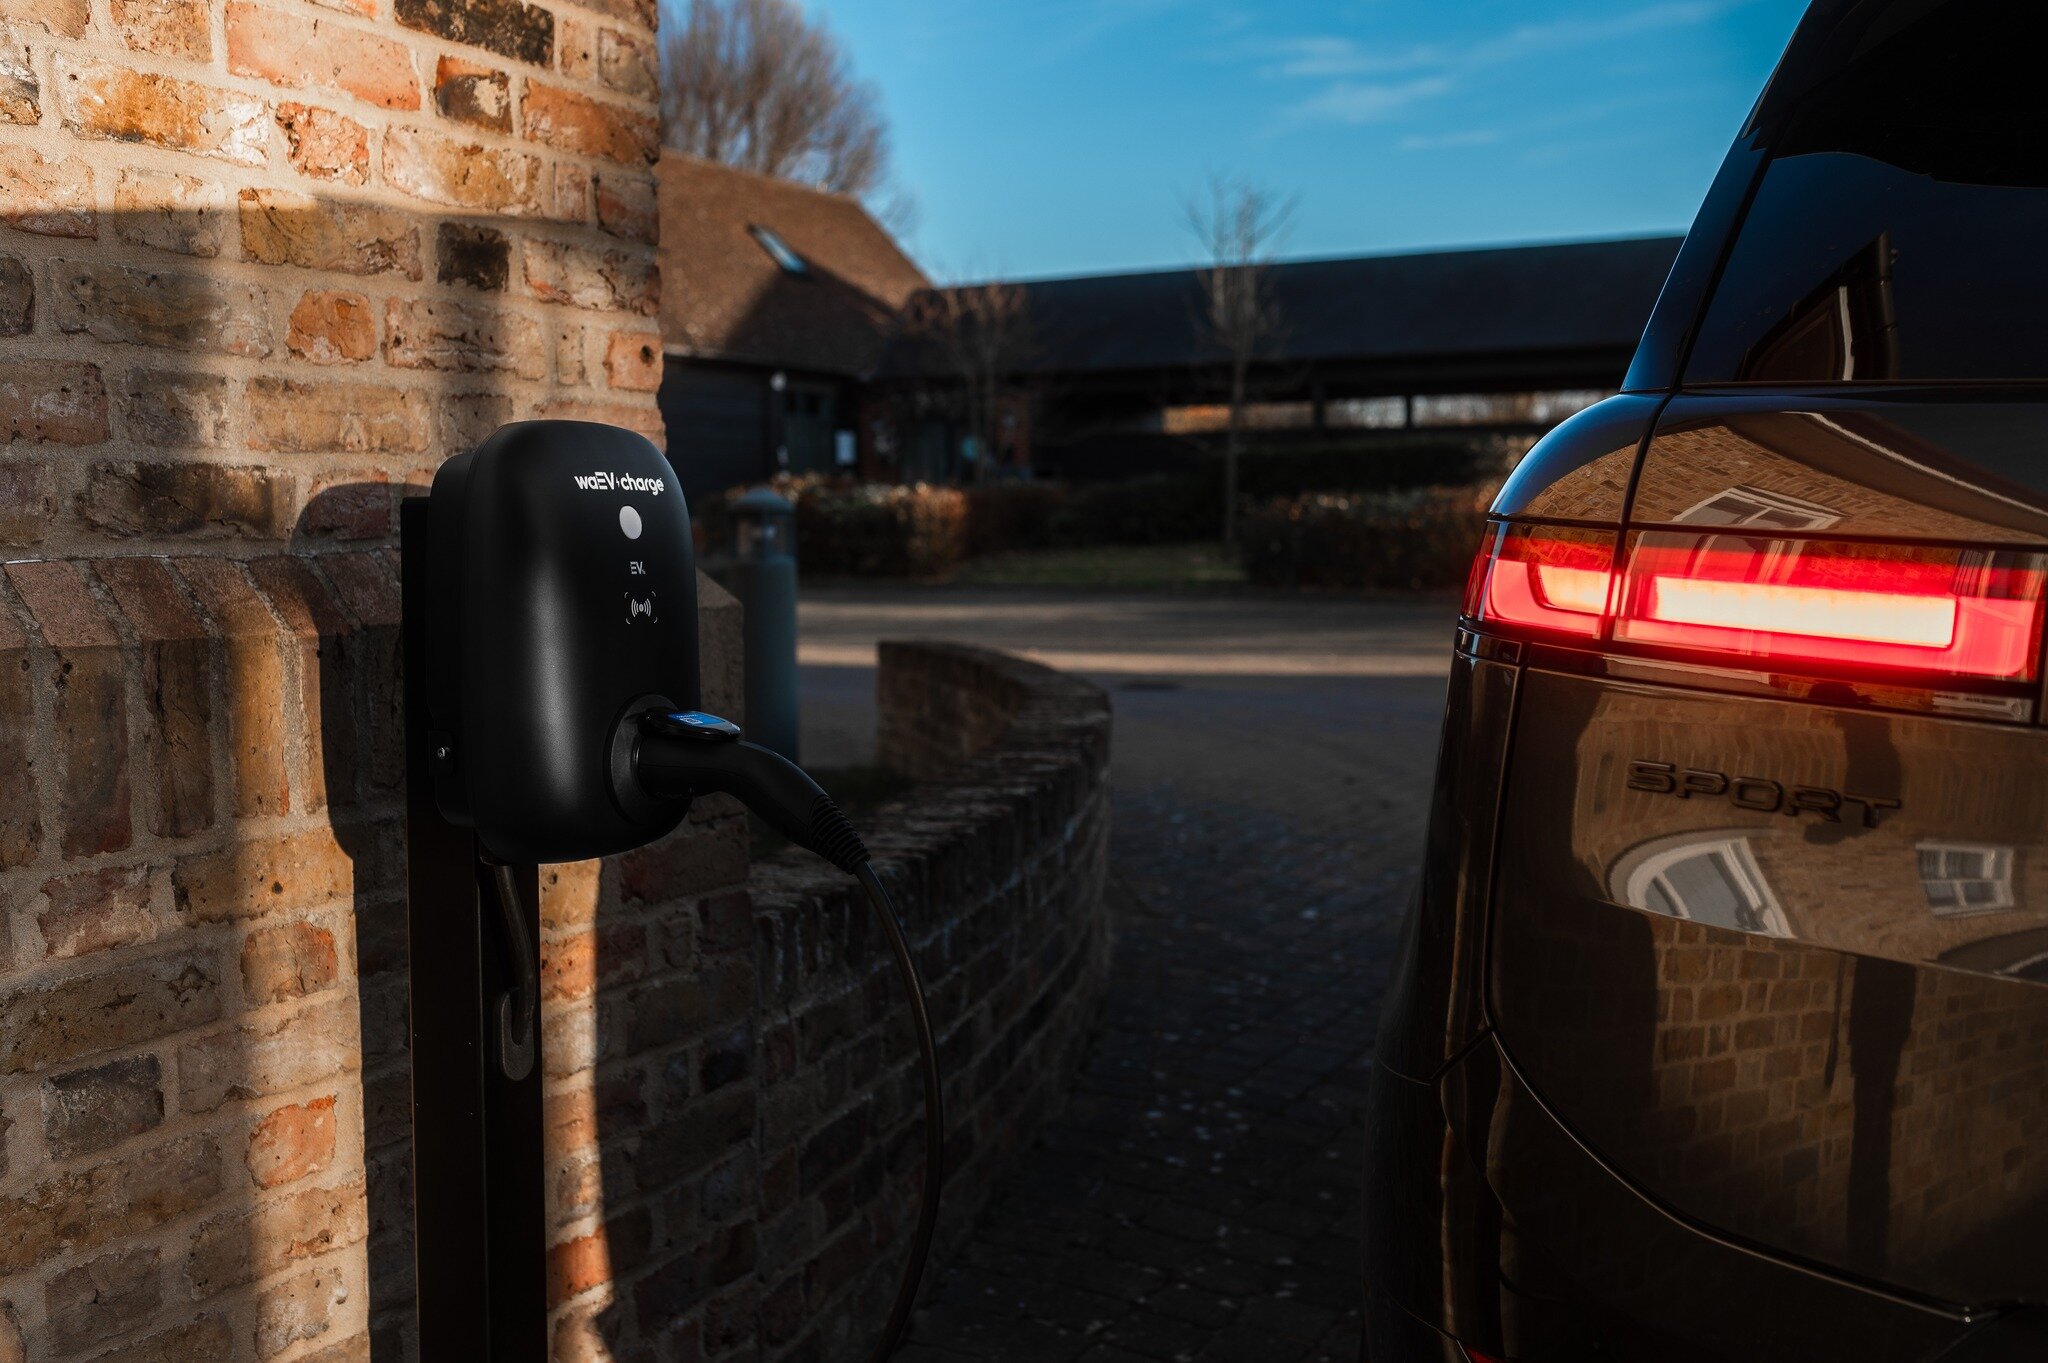 We are delighted to announce the release of our untethered charging solution, the waEV-charge  EV1s powered by ev.energy ergy.
 
As part of the waEV-charge product line, the EV1s smart charger embodies excellence in both design and functionality. Its